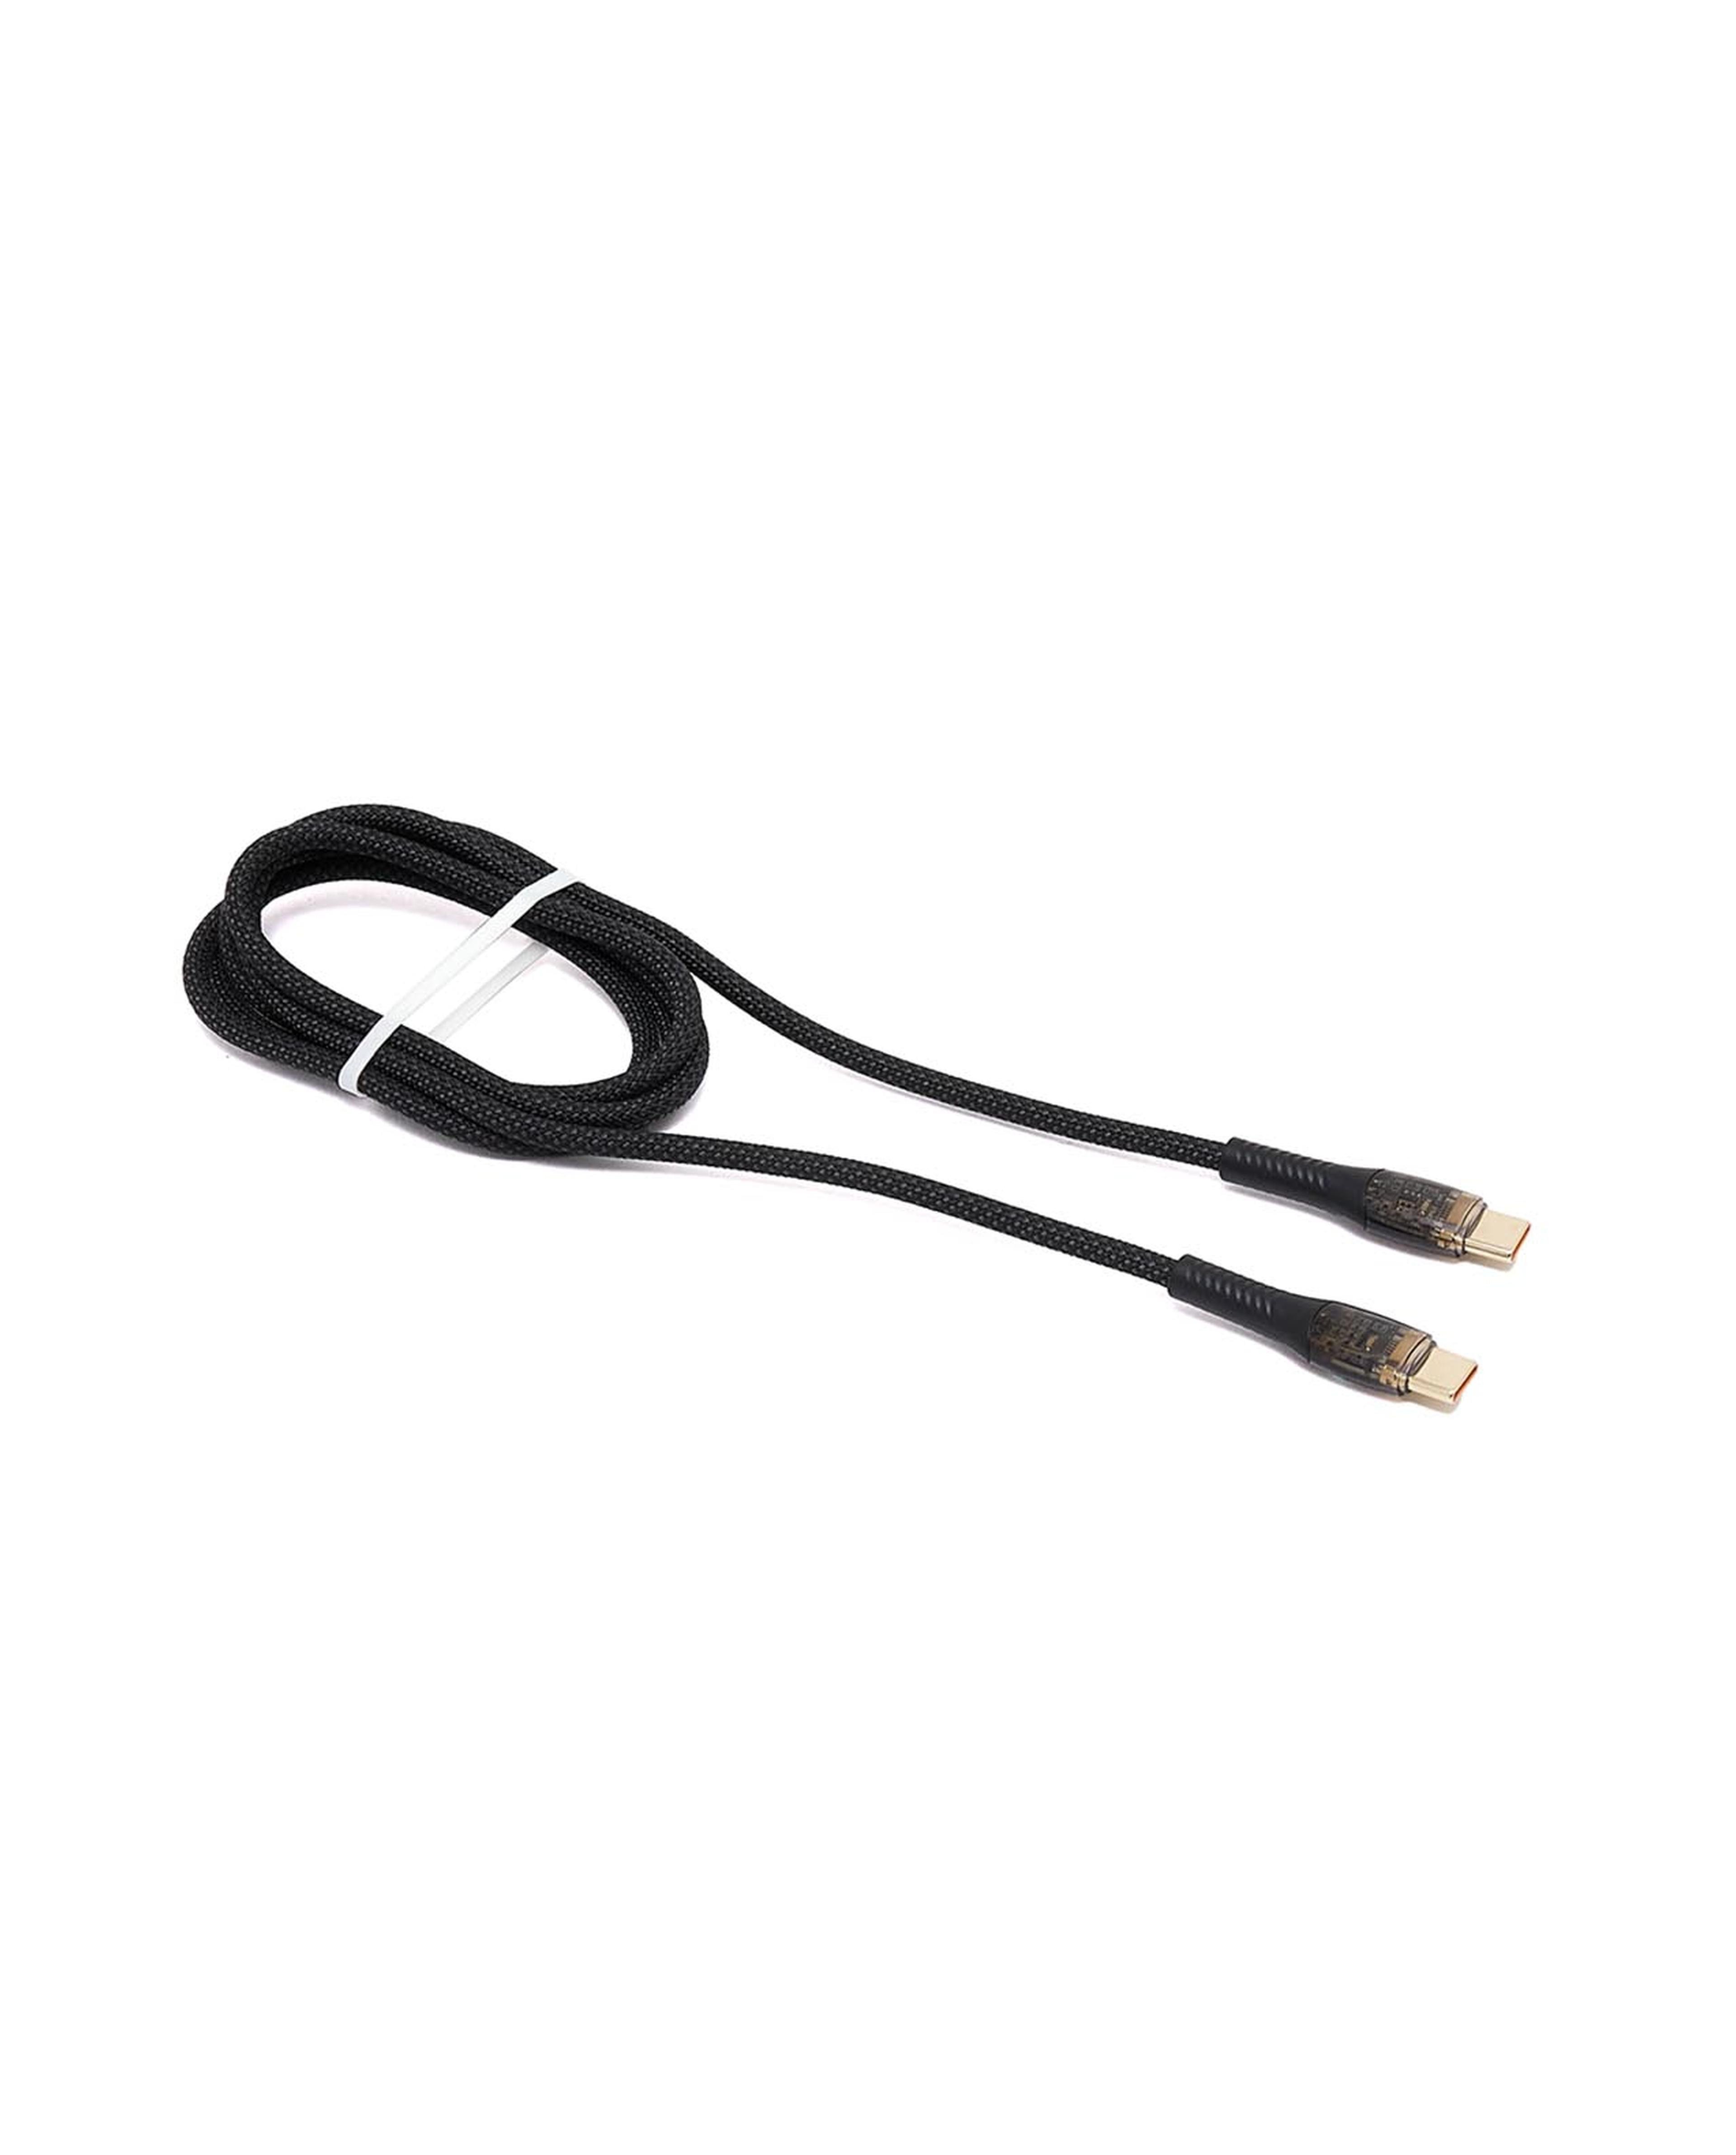 USB-C to Type-C Cable